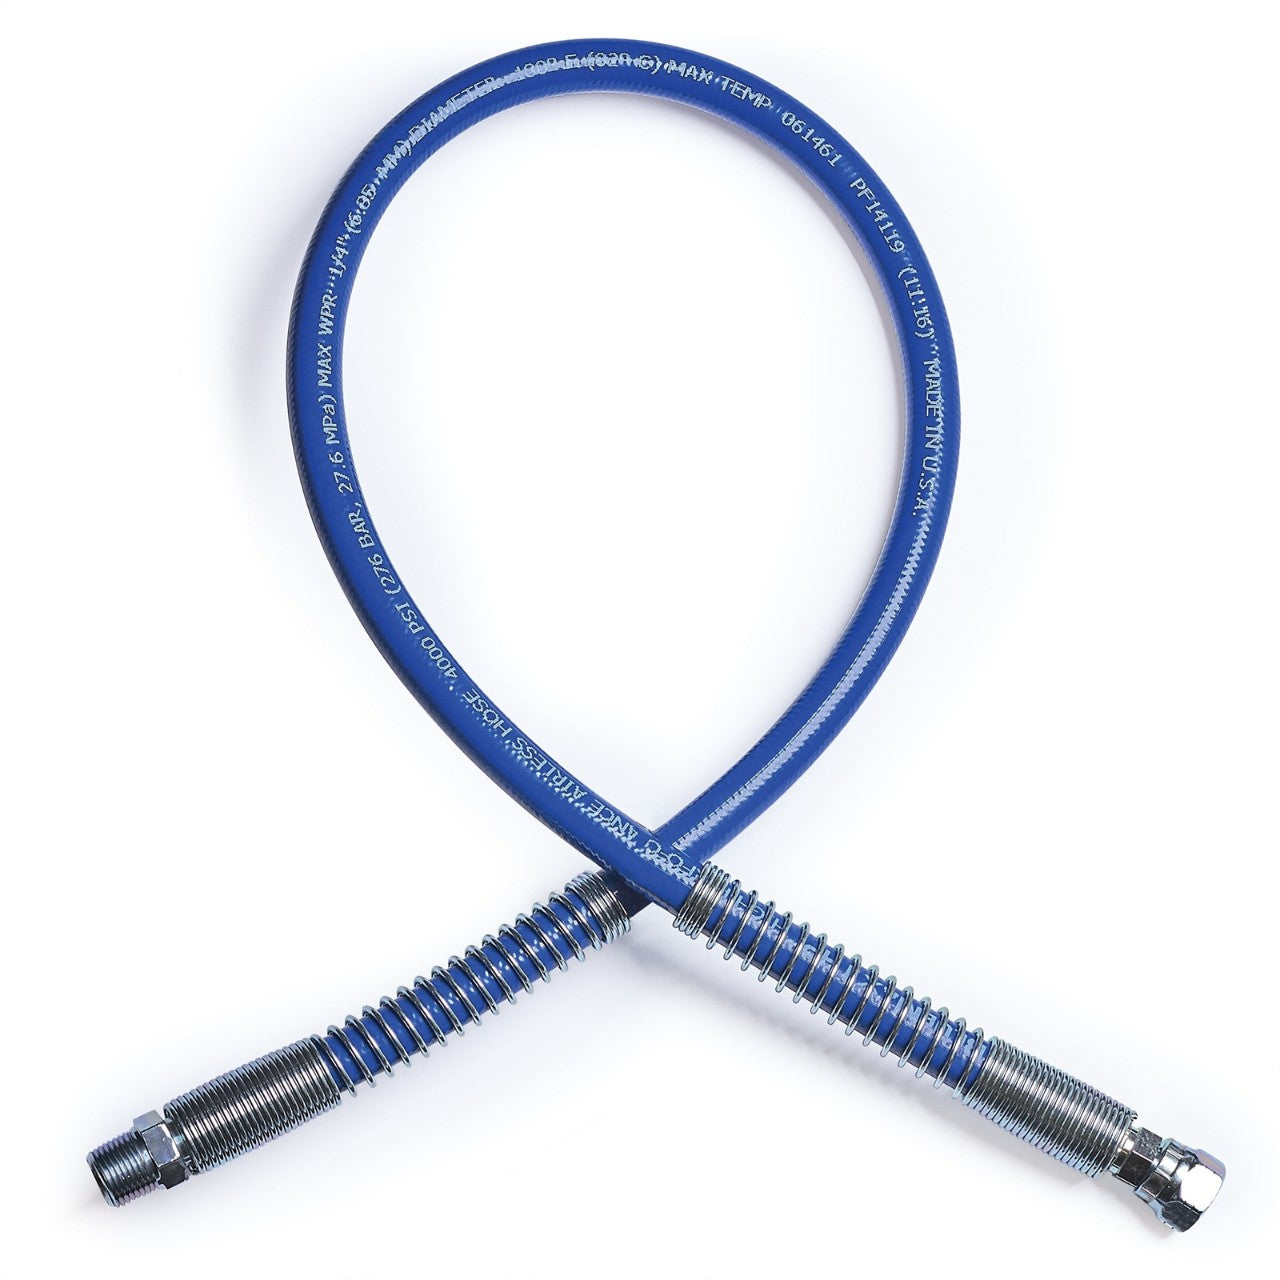 GRACO BlueMax II HP Airless Whip Hose, 1/4 in x 3 ft (0.9 m), 4000 psi